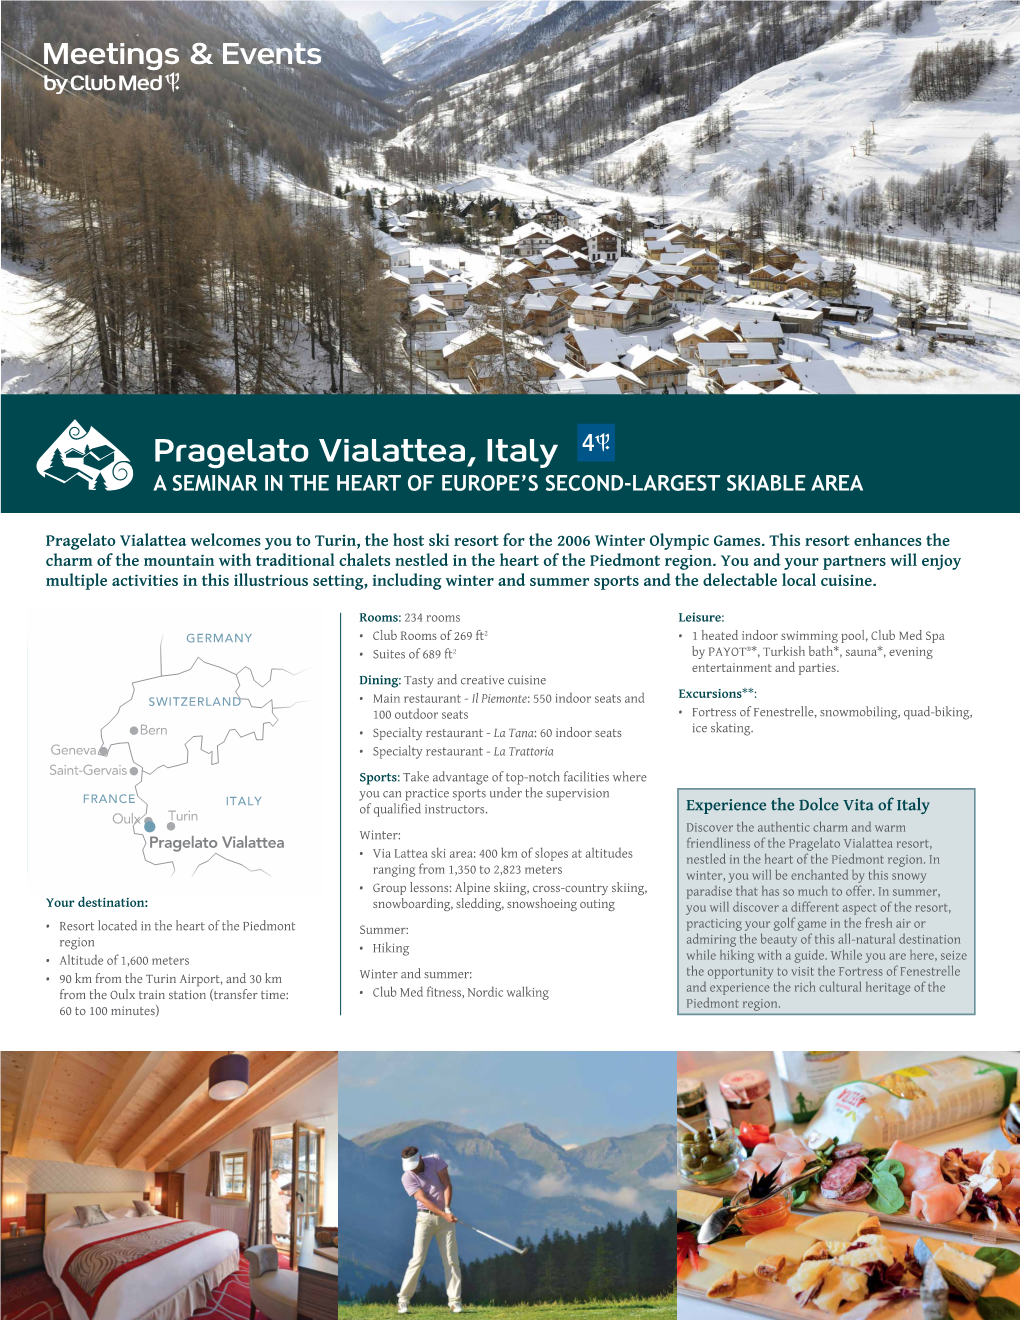 Pragelato Vialattea, Italy 4 a SEMINAR in the HEART of EUROPE’S SECOND-LARGEST SKIABLE AREA